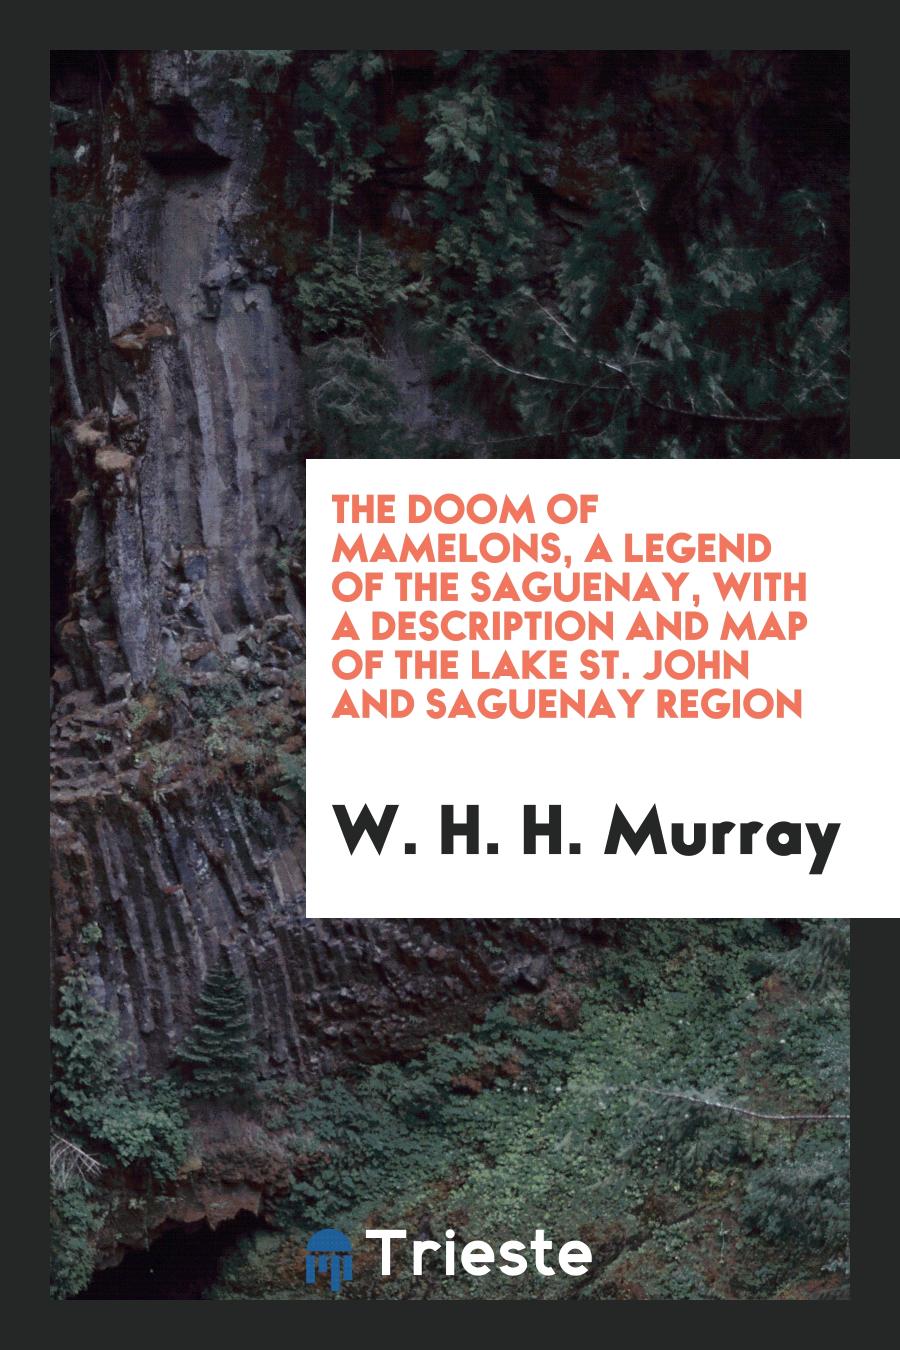 The Doom of Mamelons, a Legend of the Saguenay, with a Description and Map of the Lake St. John and Saguenay Region